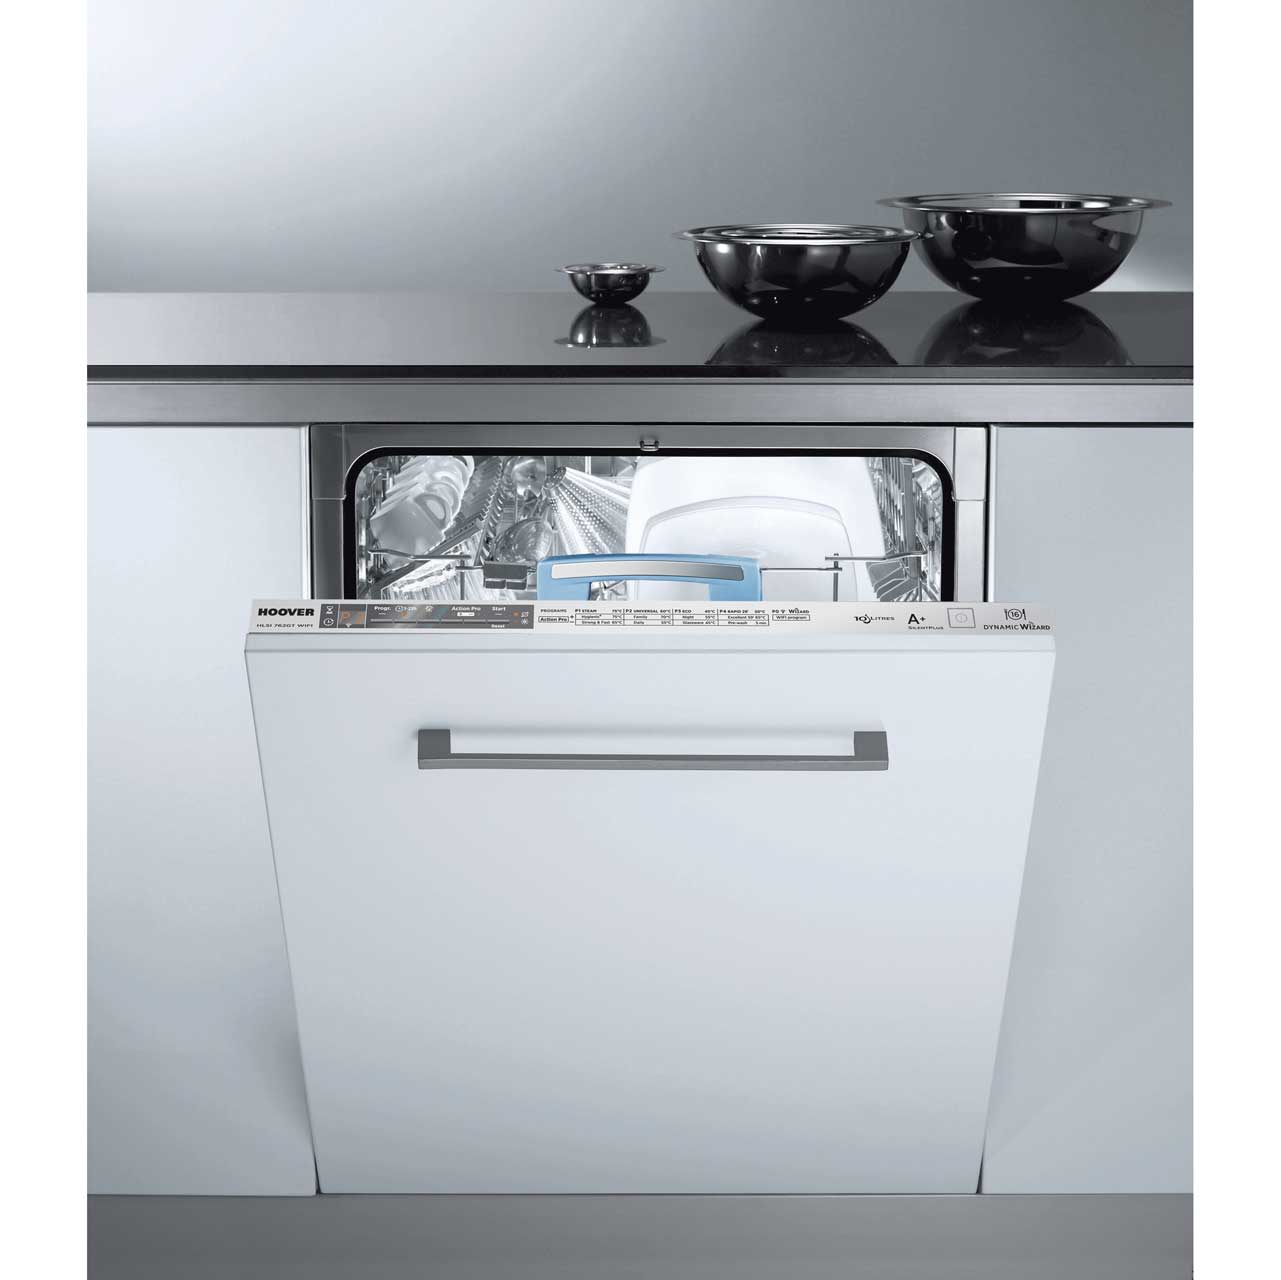 Hoover Dynamic Wizard HLSI762GT Integrated Dishwasher in Stainless Steel